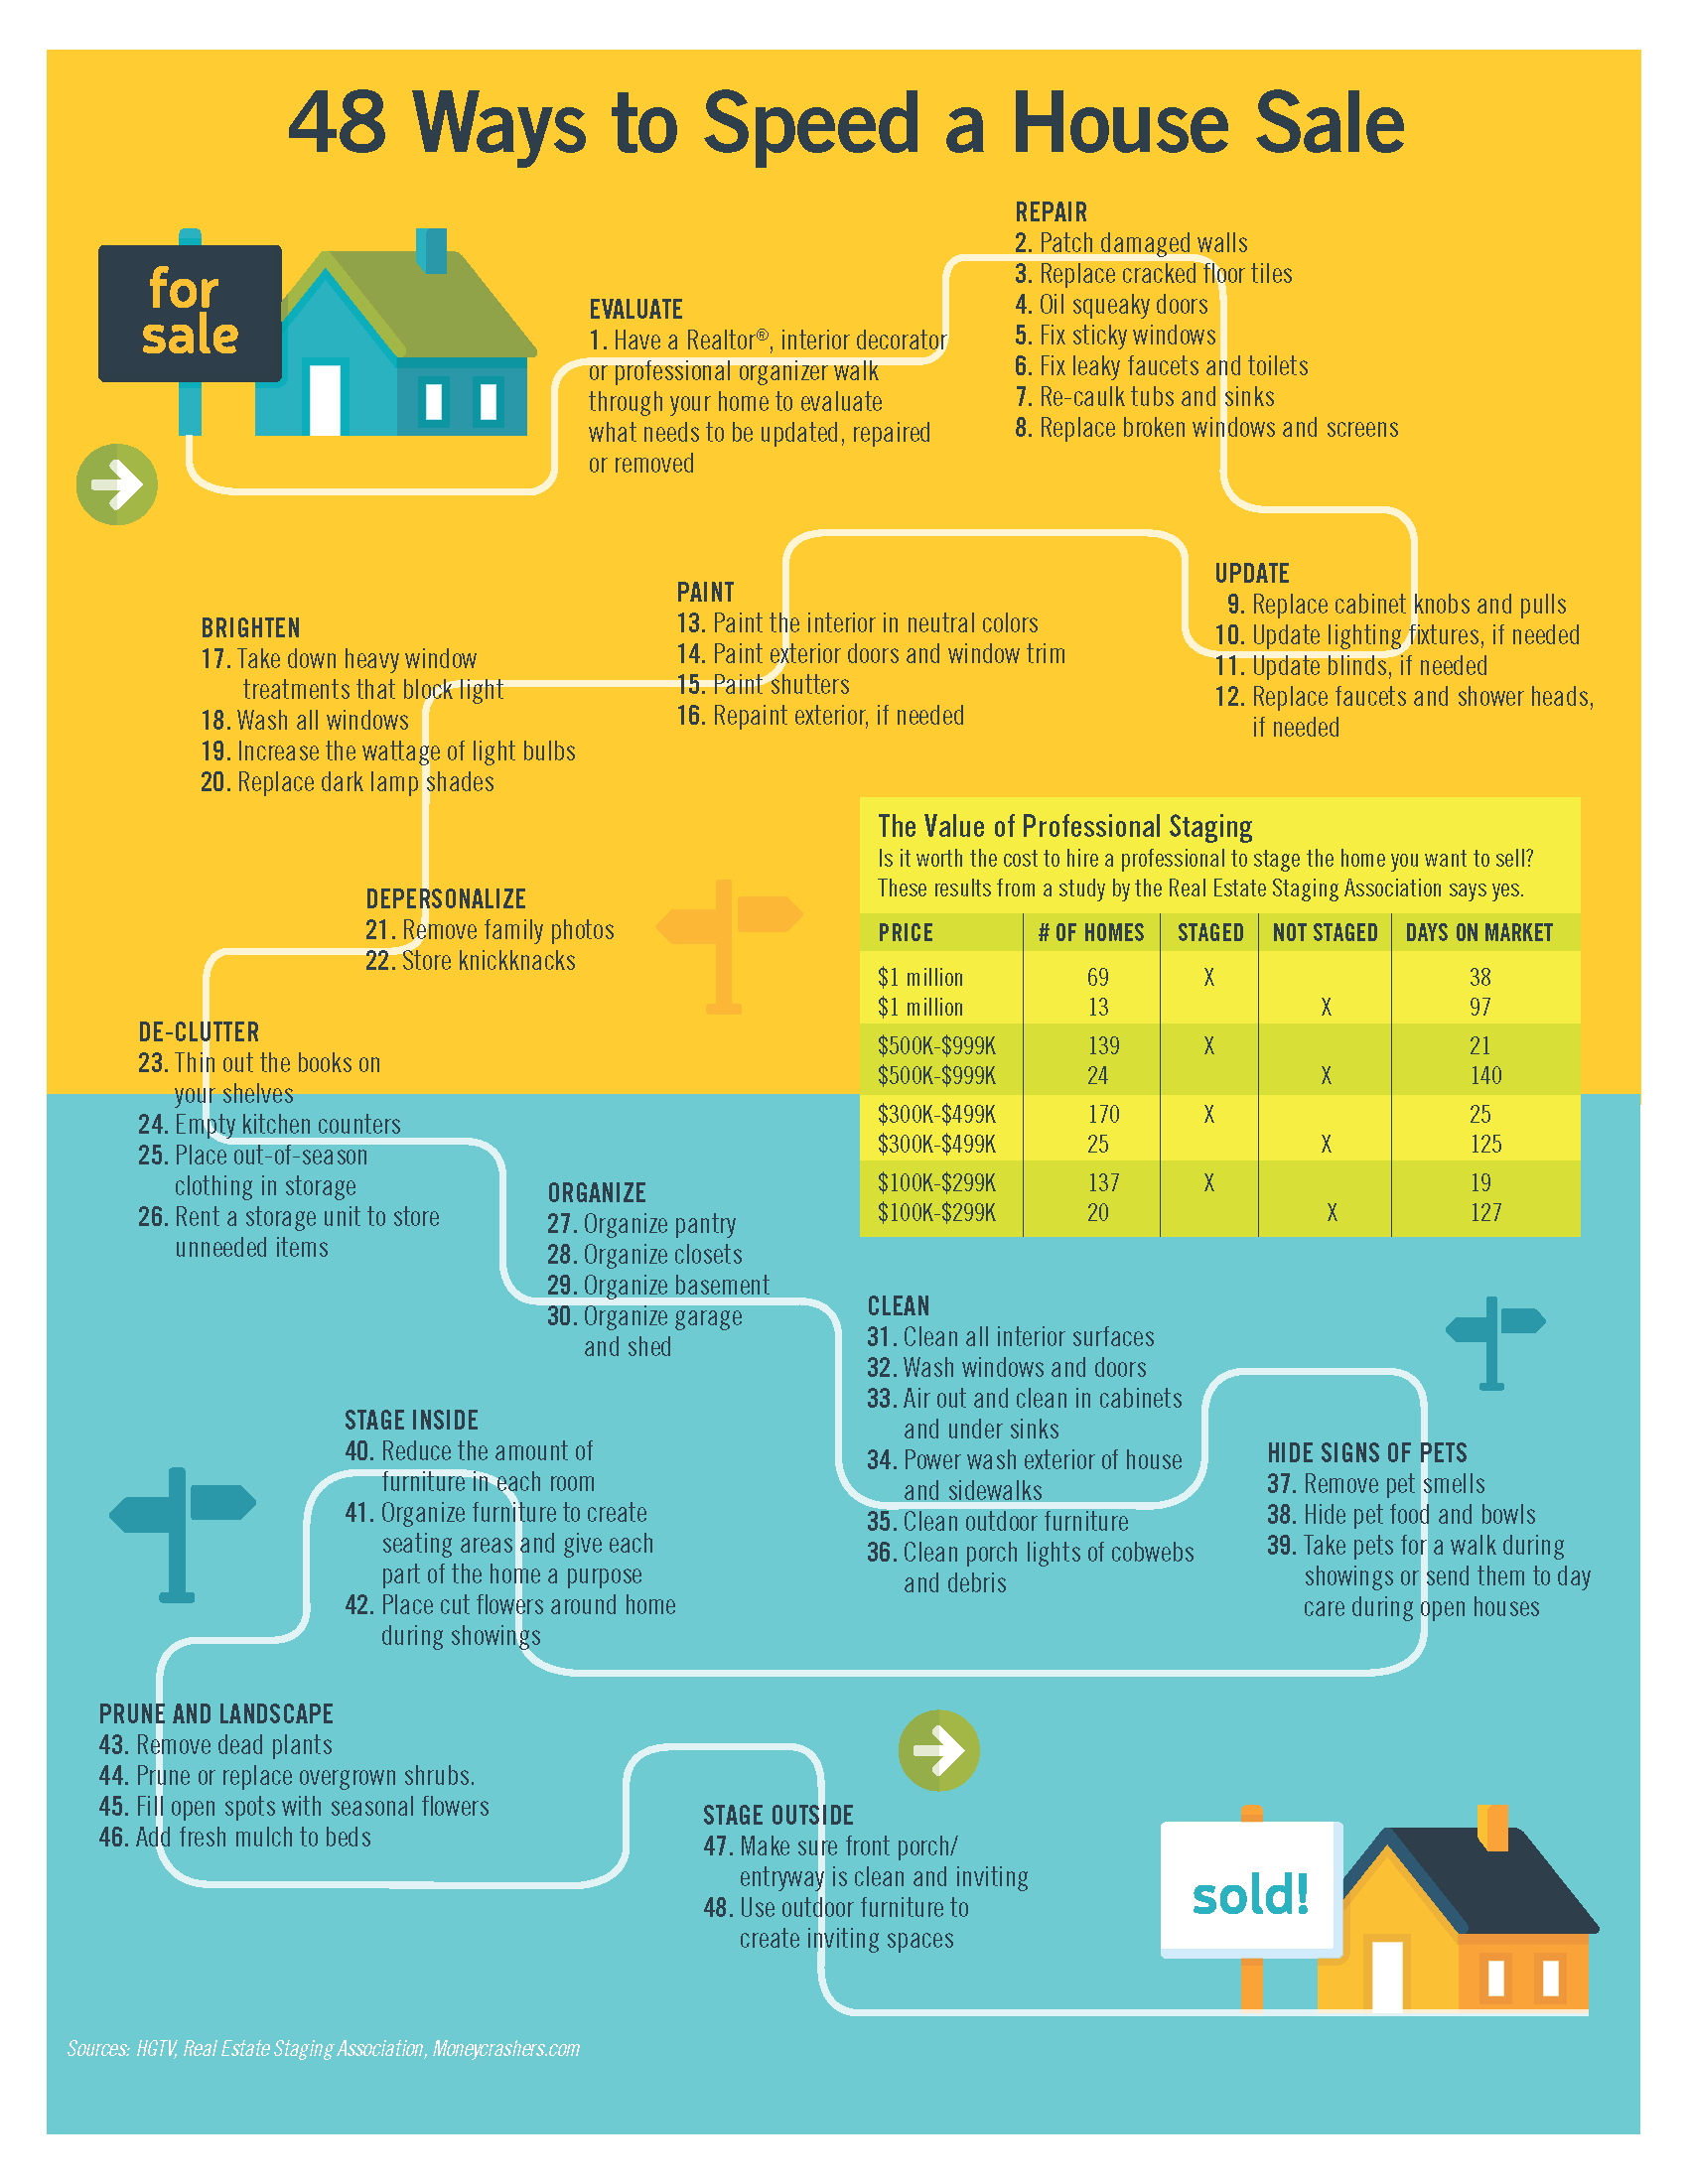 48 ways to speed a house sale